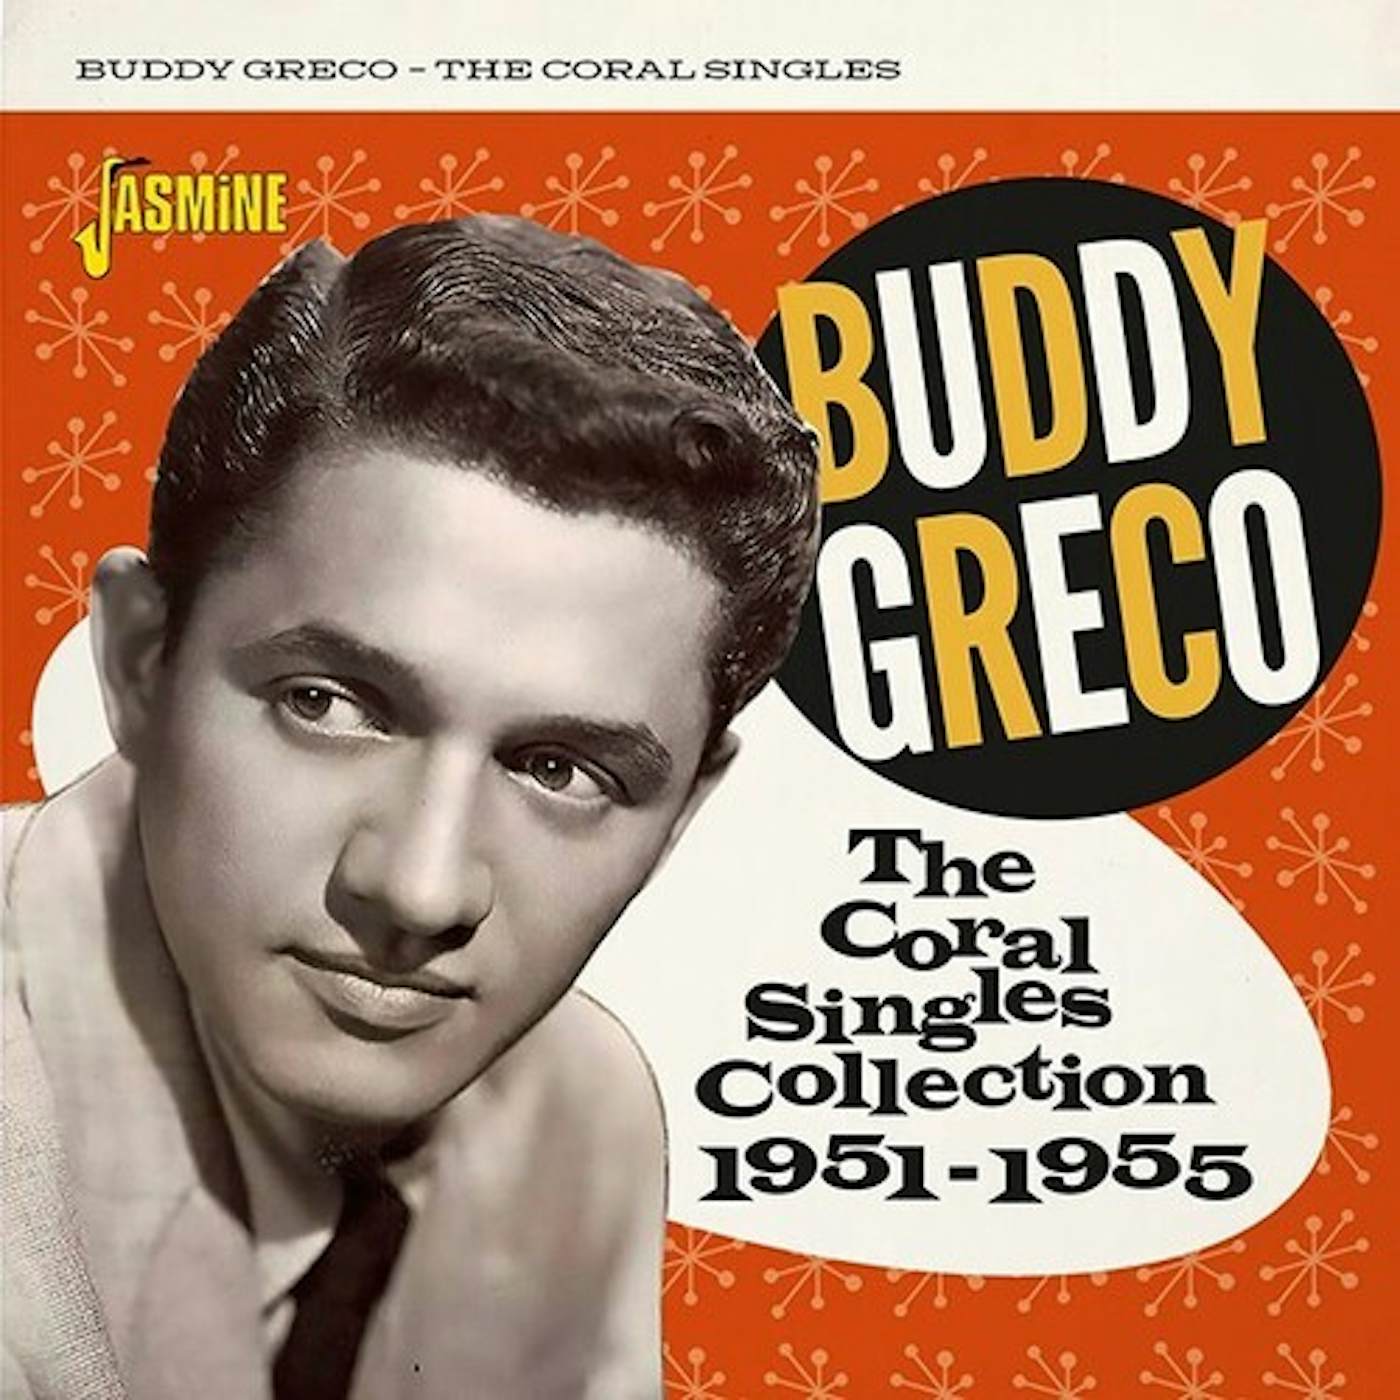 Buddy Greco CORAL SINGLES COLLECTION 1951-1955 CD